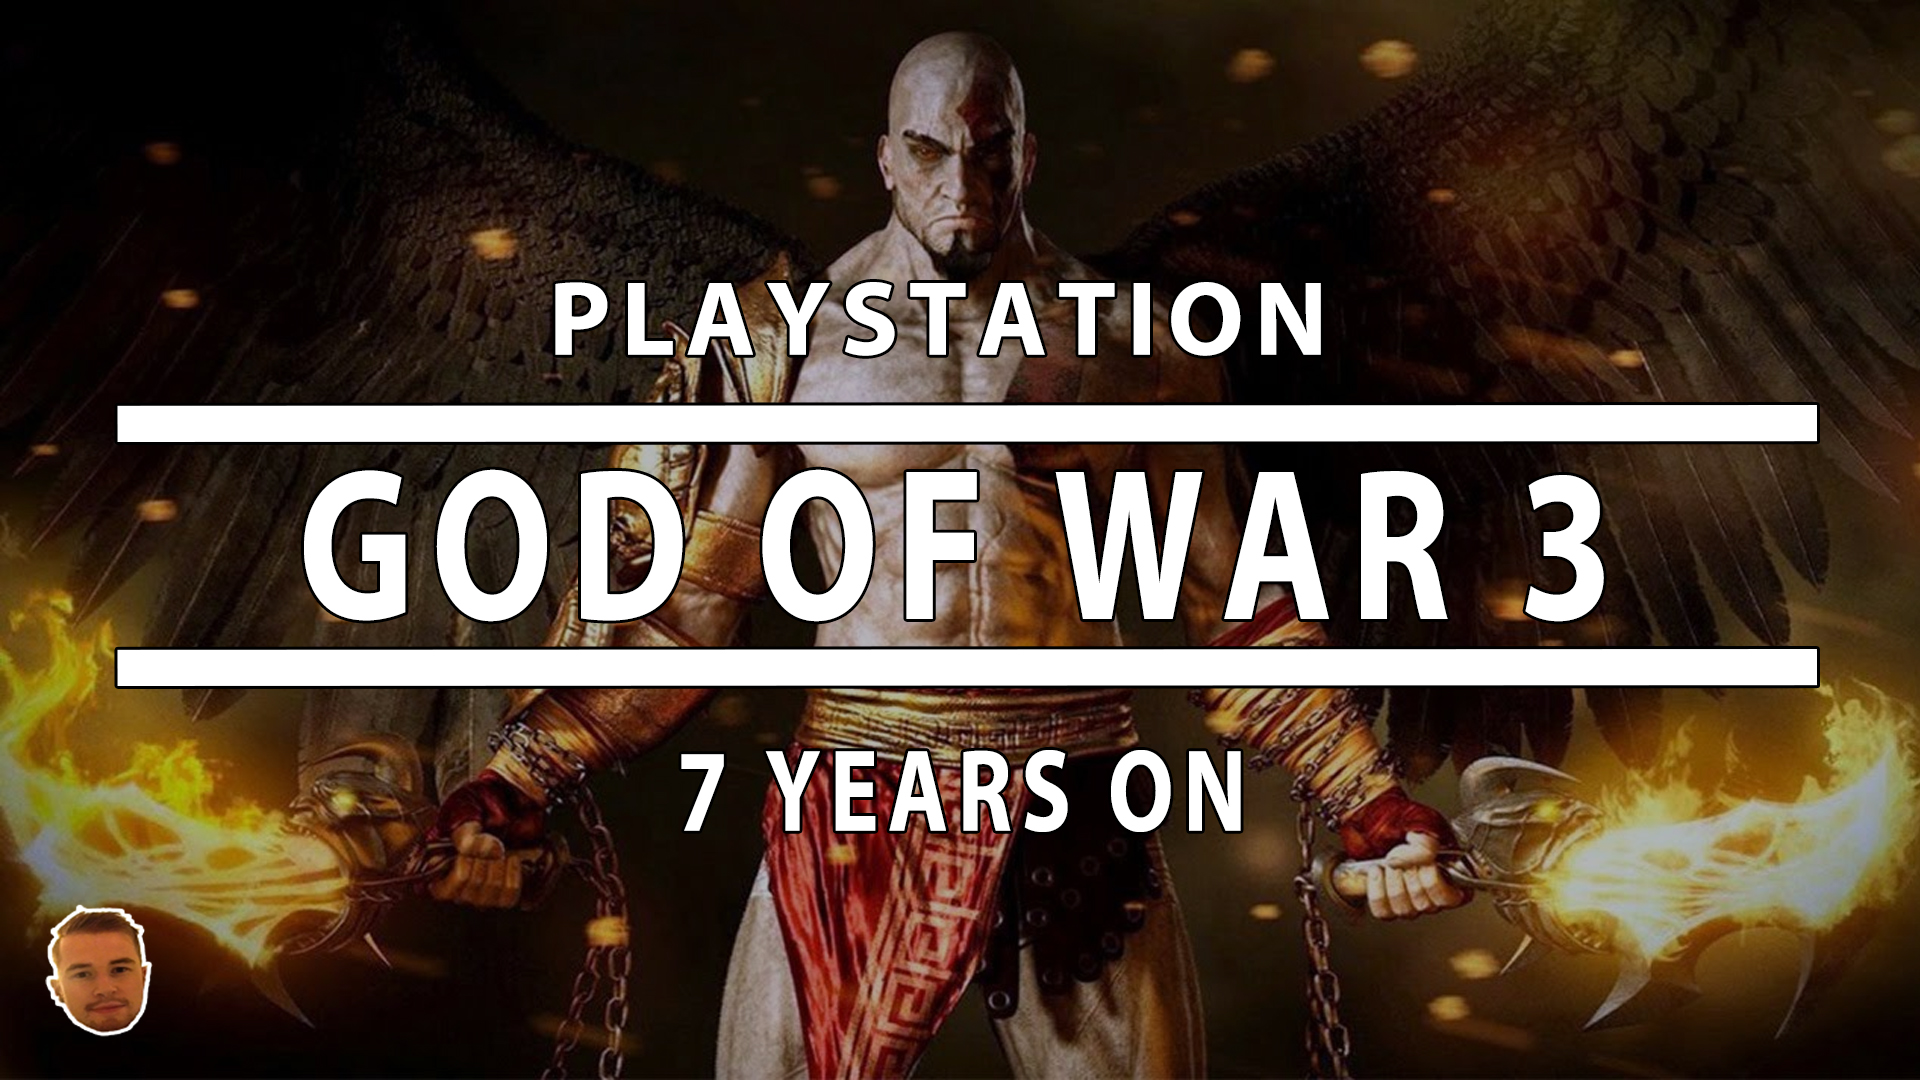 God Of War 3 7 Years On Playstation Classic Game Review and Analysis